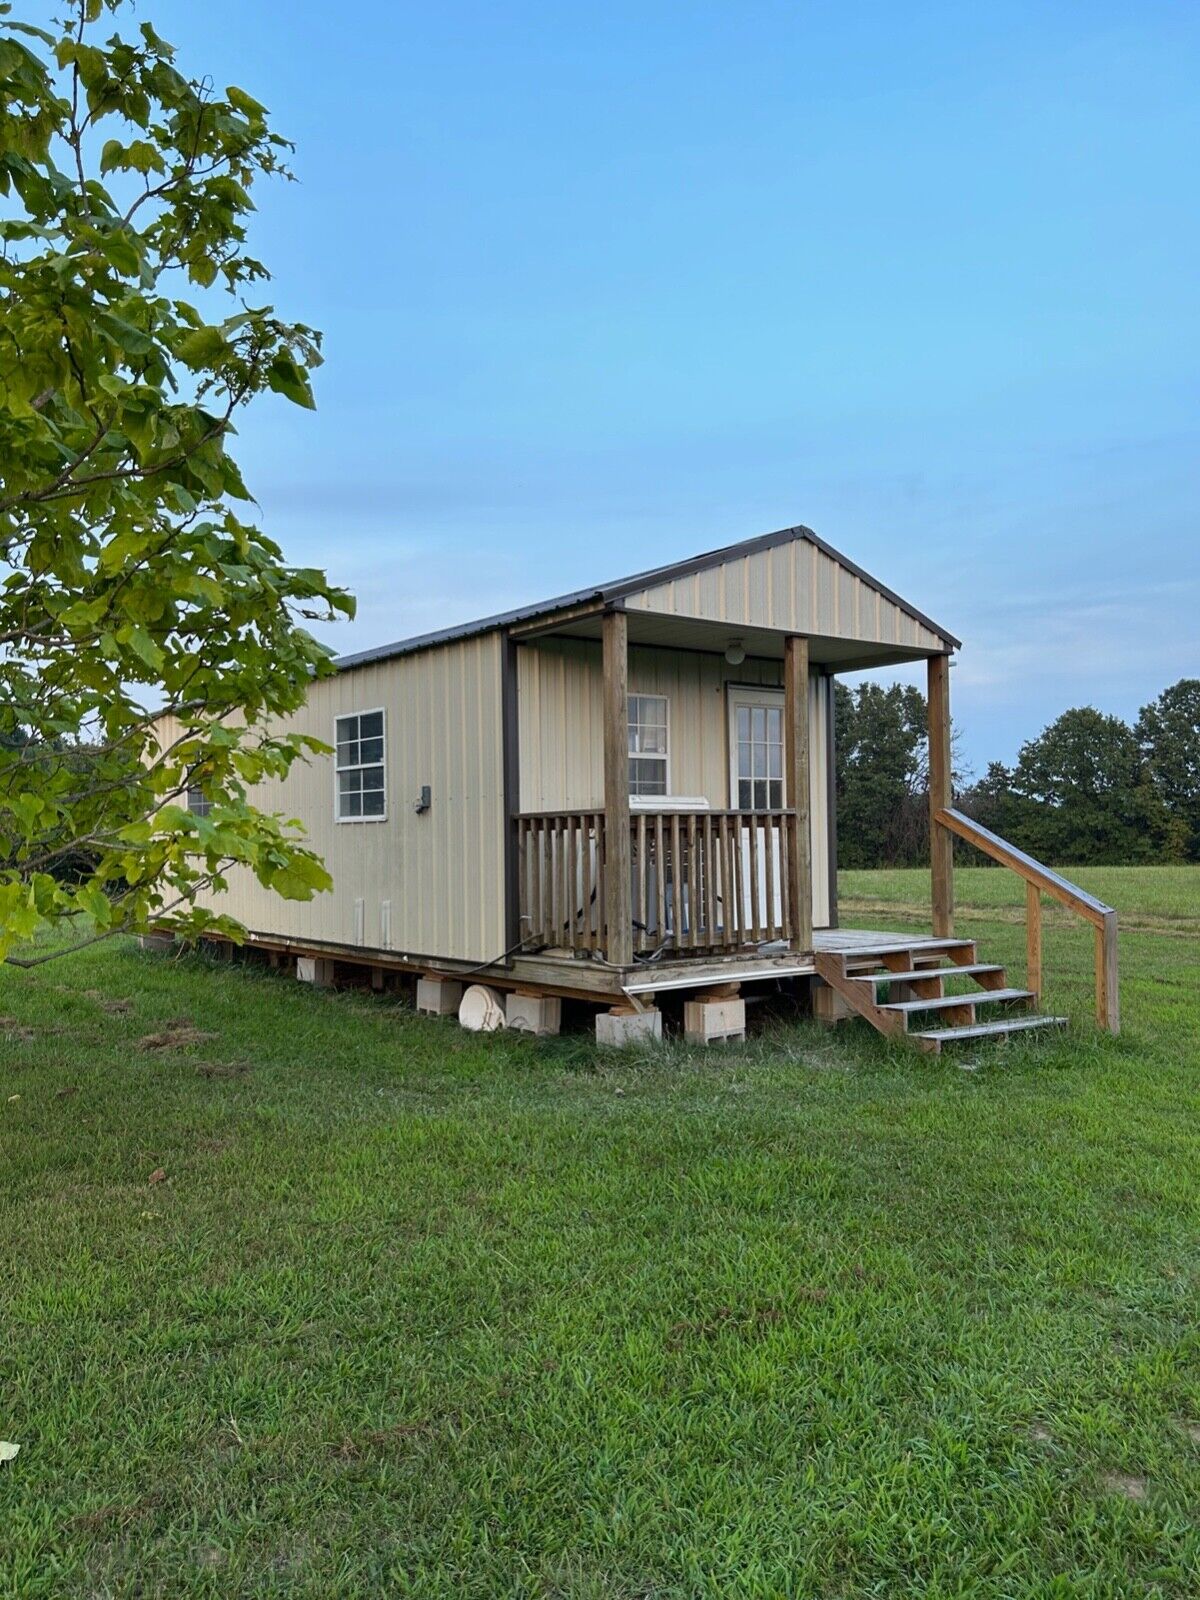 Unfinished Tiny house for sale 12 x 32 ft with 4′ porch Derksen home $27,500